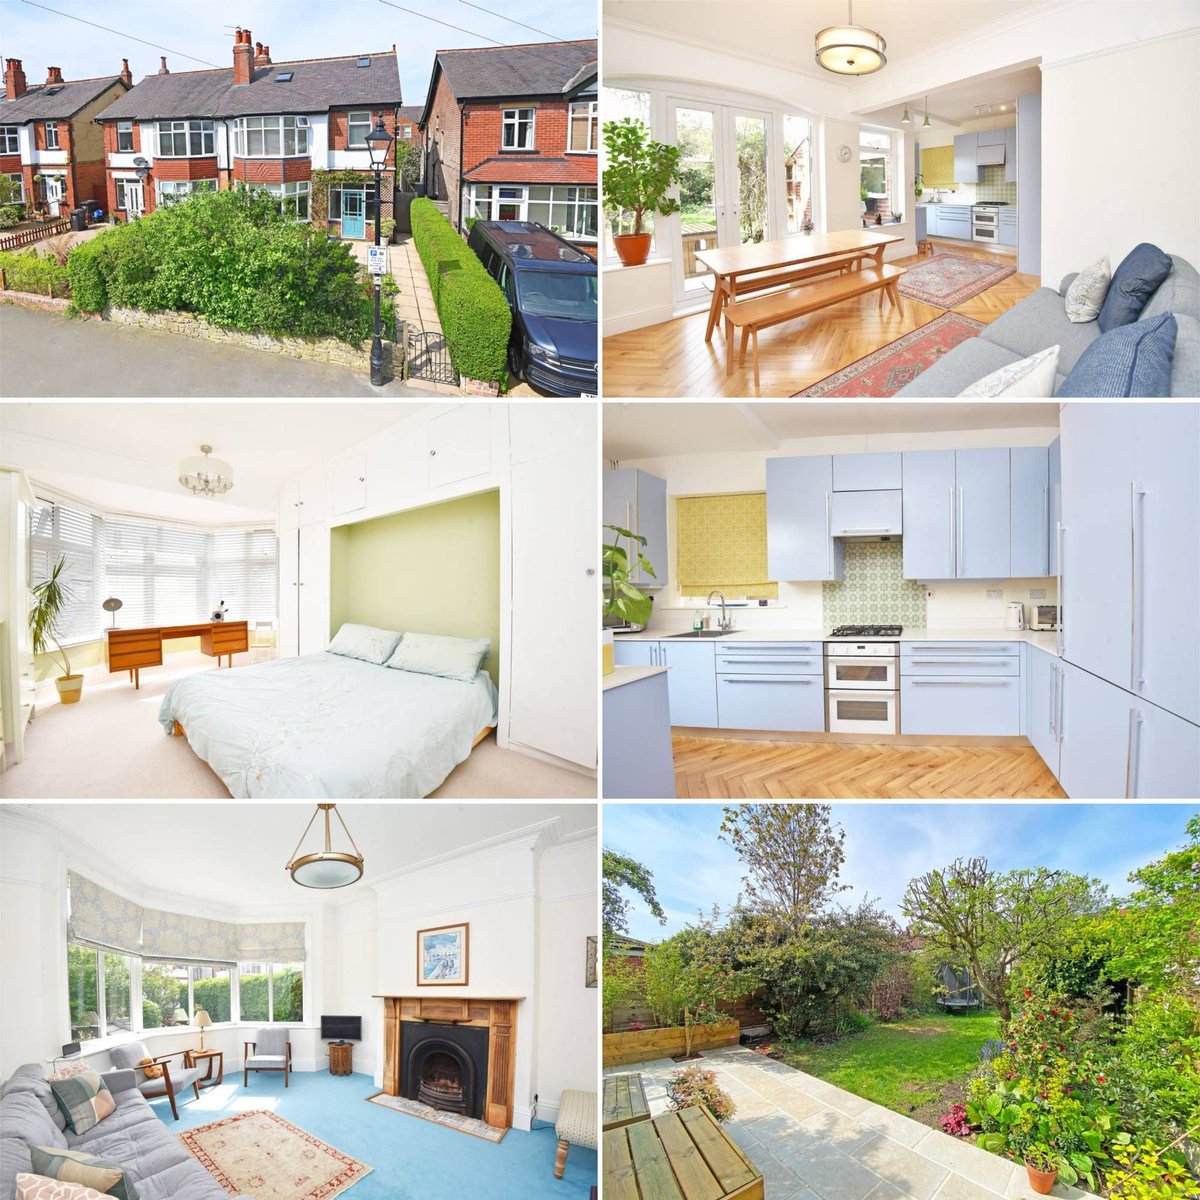 A spacious, newly updated & beautifully presented 5 bed semi-detached house with attractive garden, situated in this desirable location well served by local amenities and close to the Harrogate Stray. 15 Lynton Gardens #Harrogate £495,000 #property #forsale #theharrogateagent